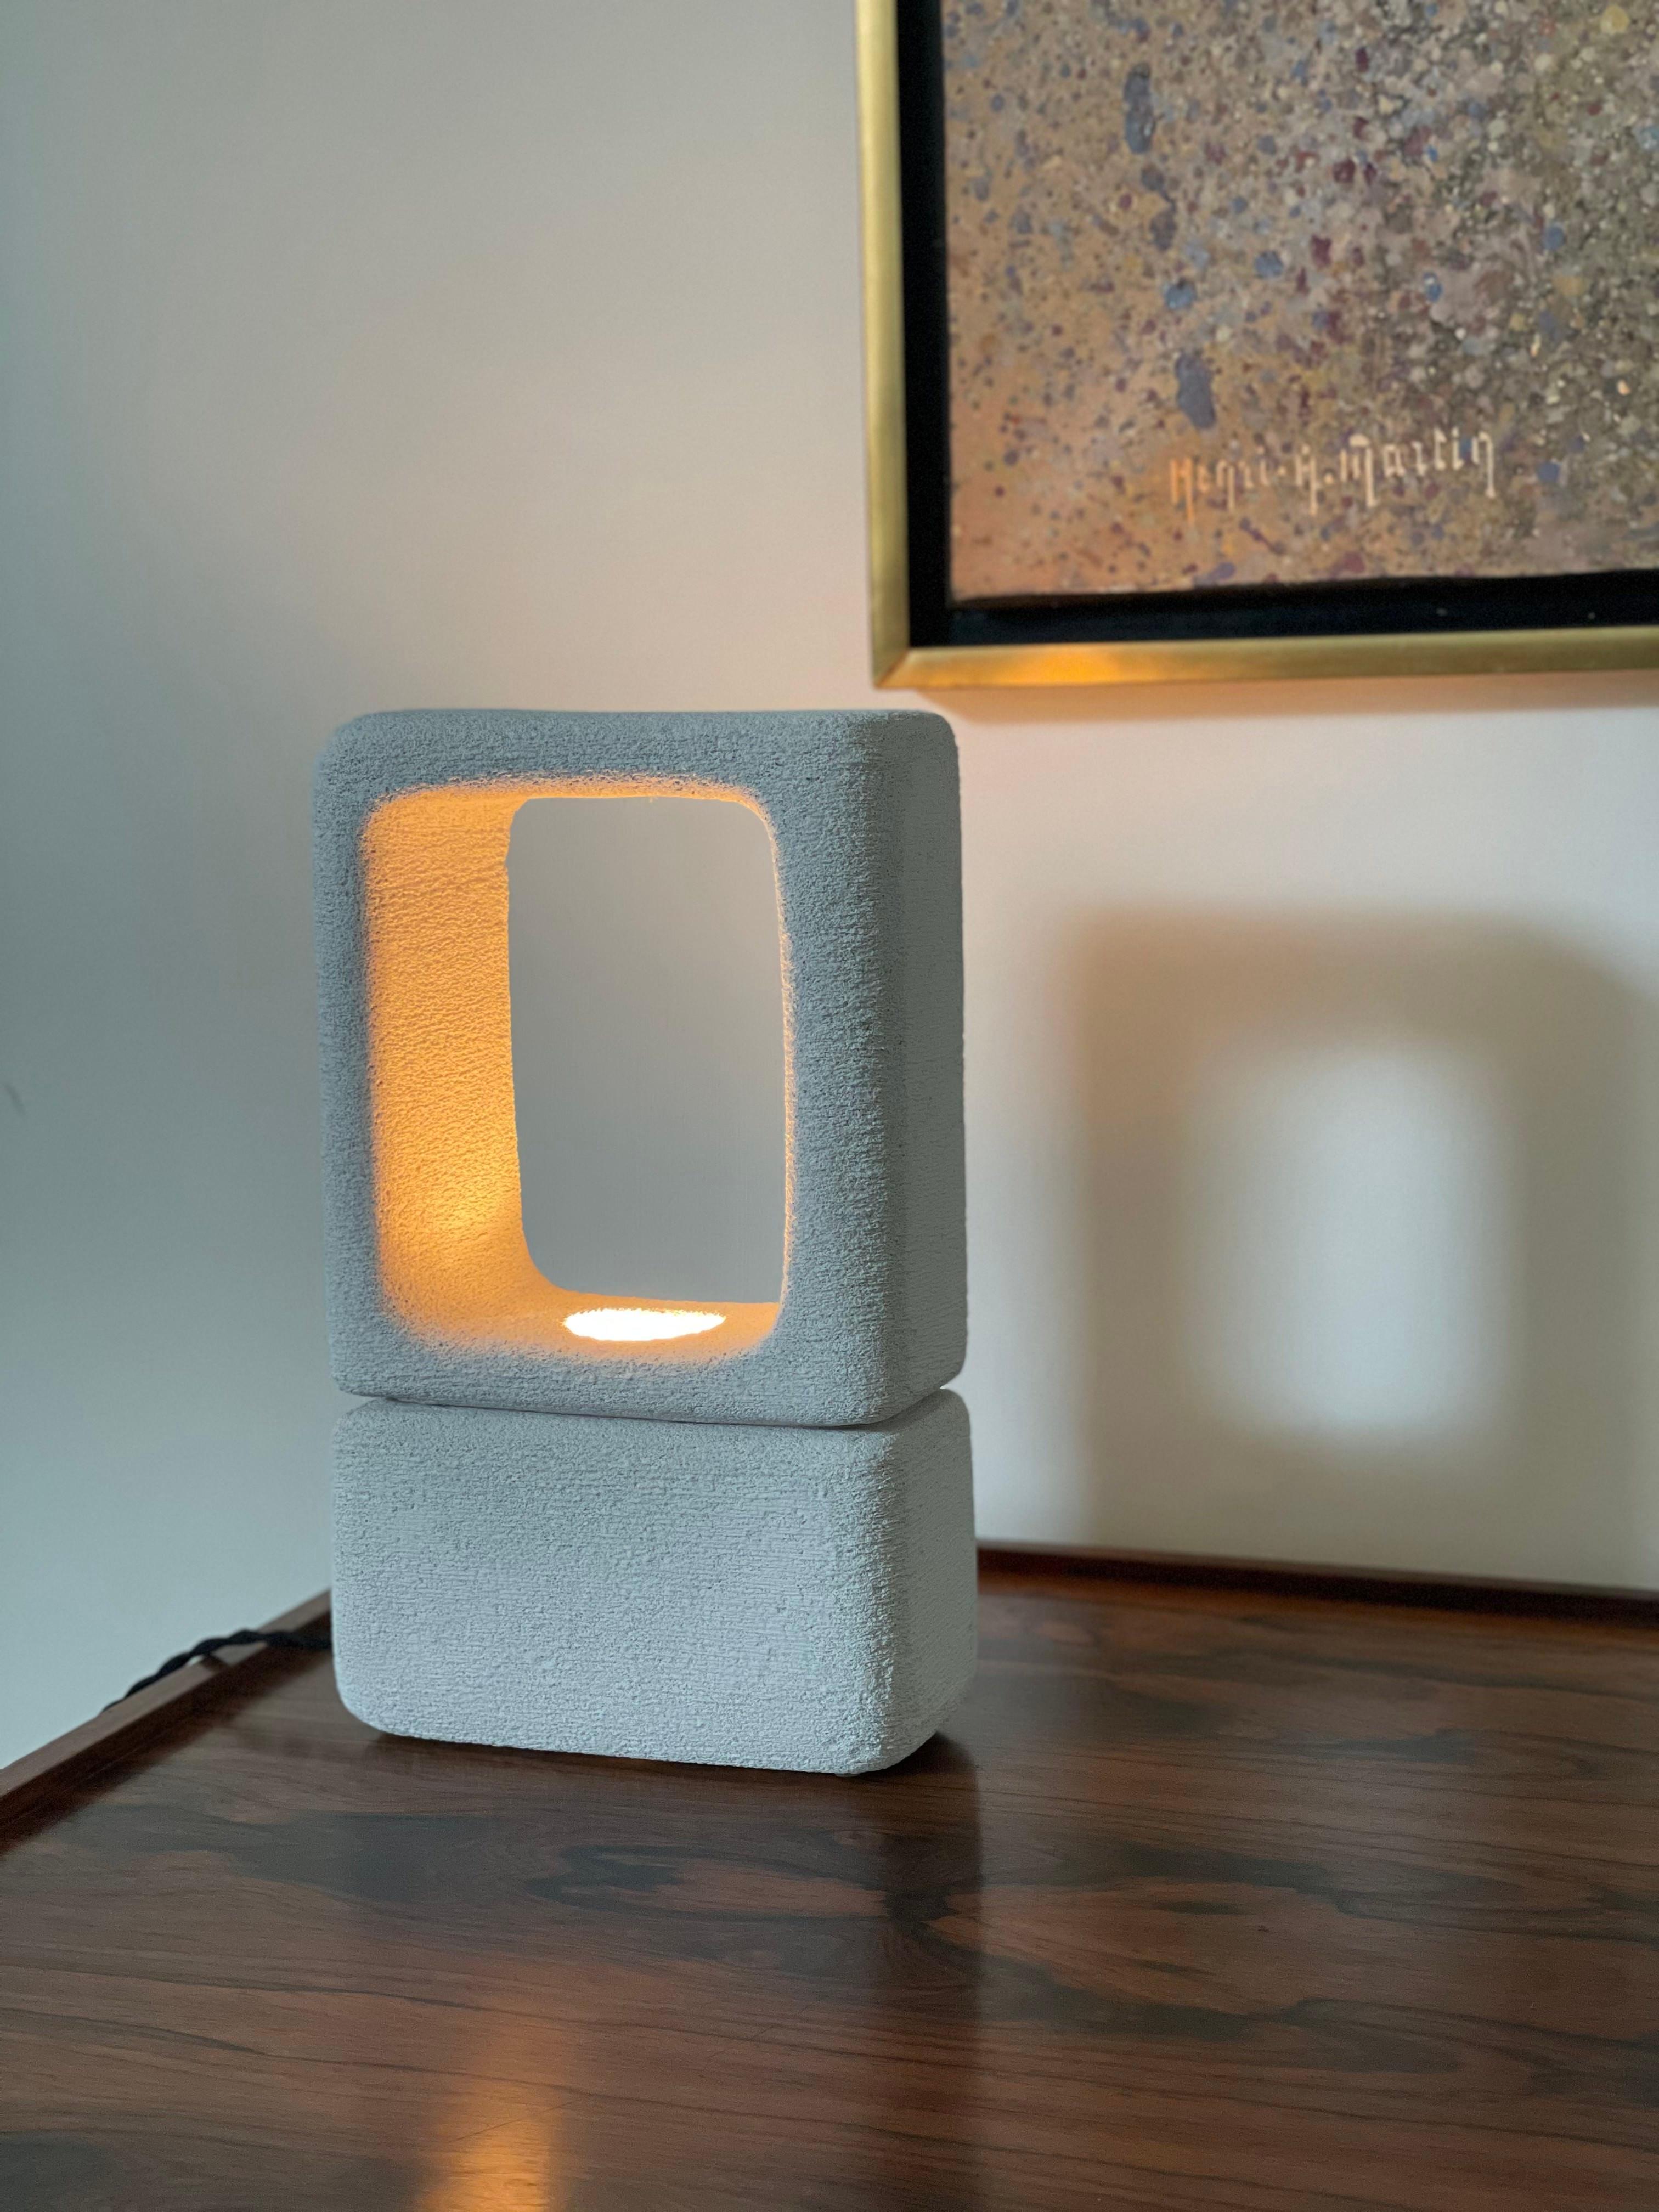 The Fuca lamp is a Creative ode to the beauty of square elements in life.
Designed in Antwerp, Belgium and hand-crafted in North Carolina, the Suma Lamp utilizes stone and mineral to revitalize the concept of lighting with its emphasis on not just